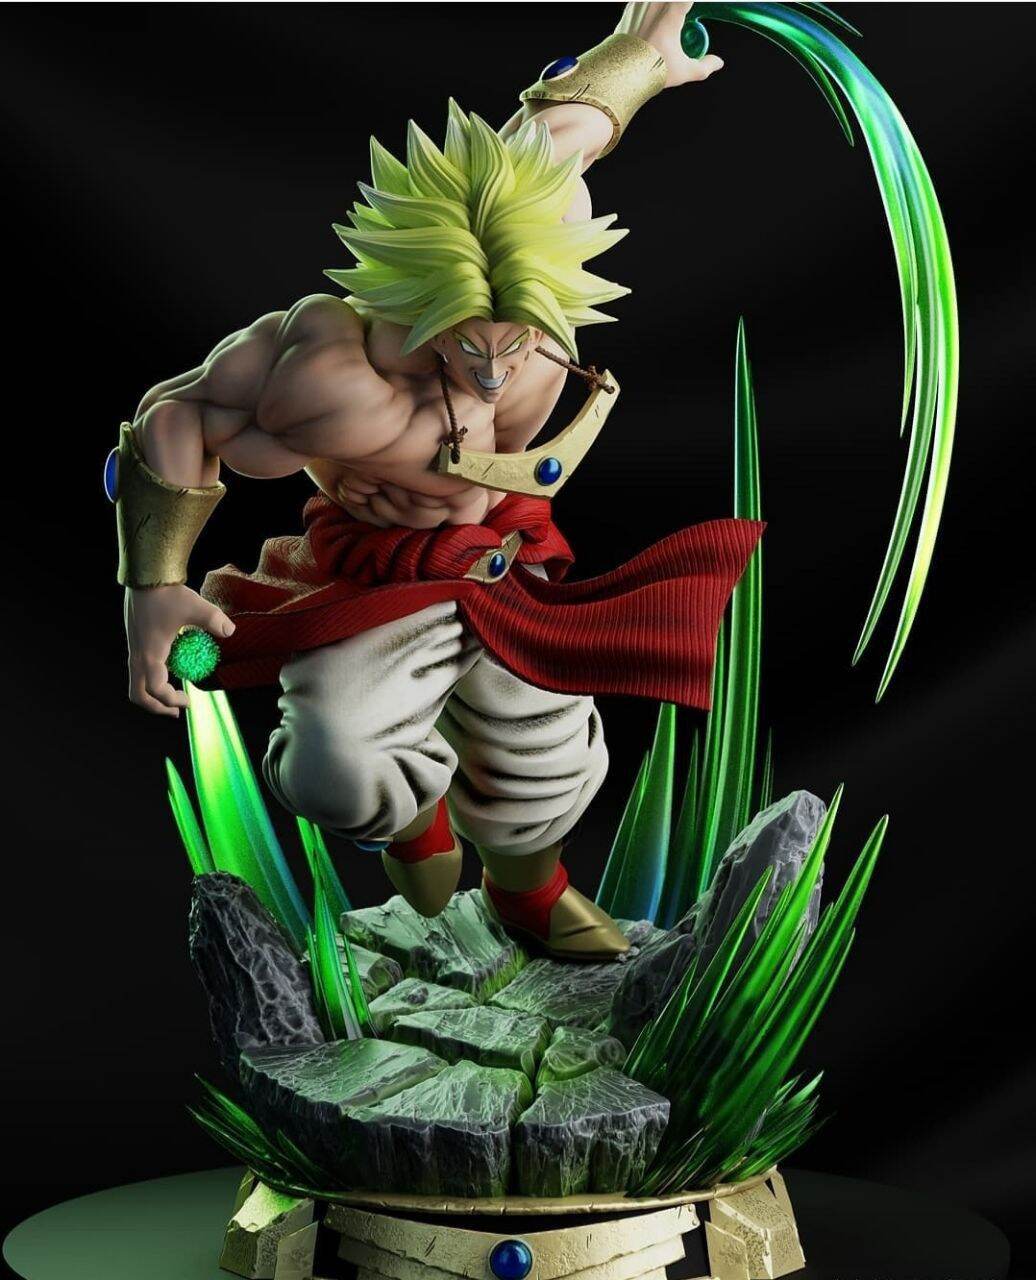 File in 3D Broly - Dragon Ball Super